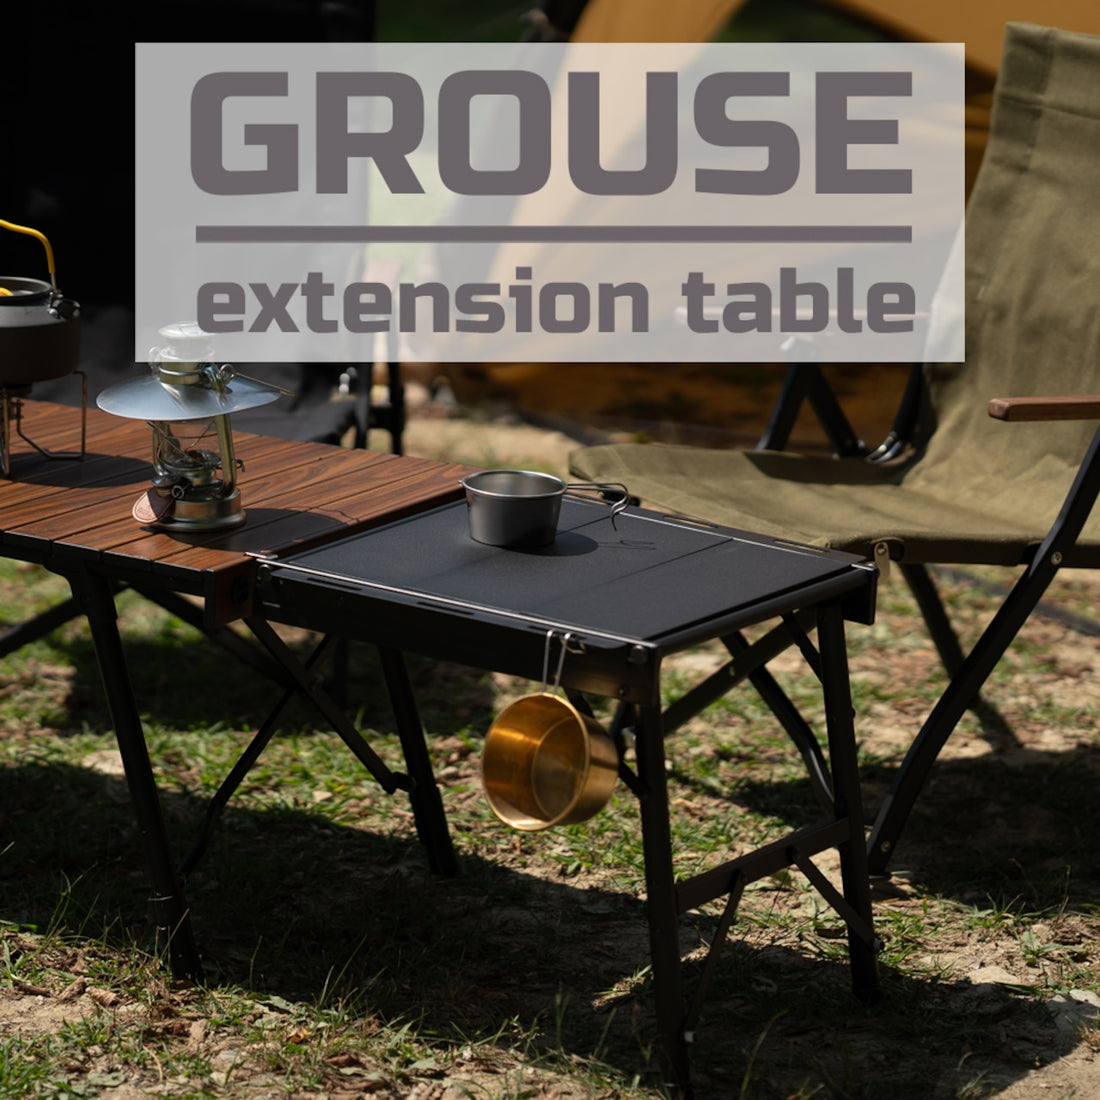 Grouse Extension Table